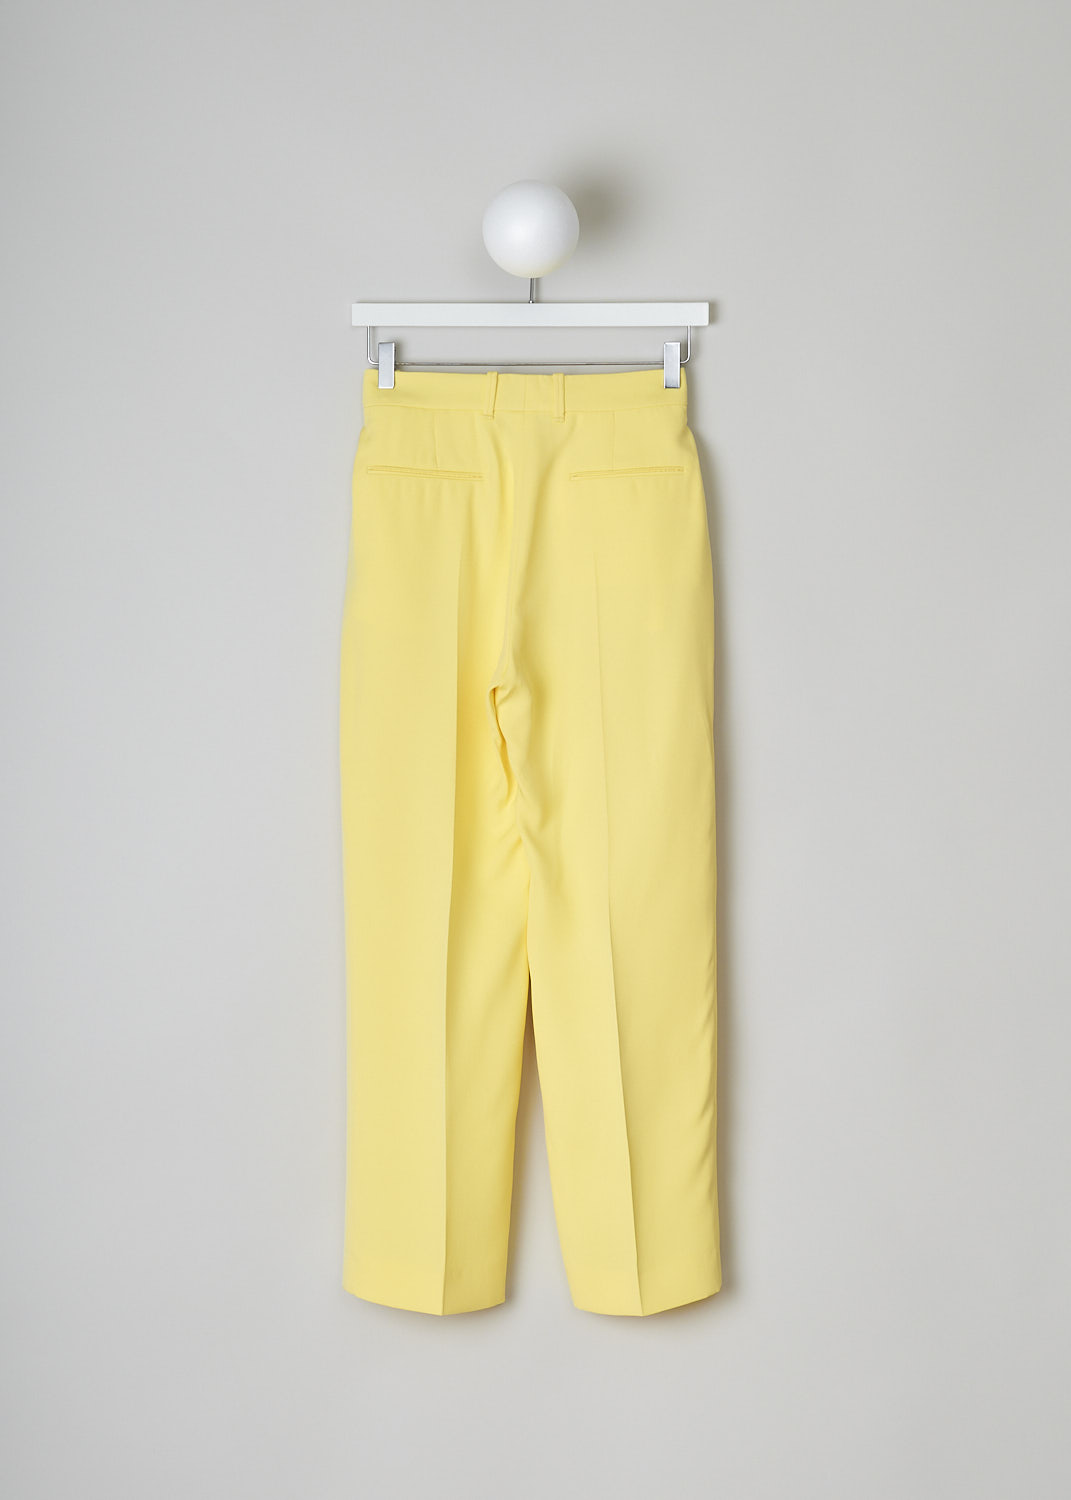 CHLOÉ, RADIANT YELLOW CLASSIC SILK PANTS, CHC22UPA12015757_RADIANT_YELLOW, Yellow, Back, These radiant yellow high-waisted pants have a waistband with belt loops and a concealed front zip and clasp closure. These pants have straight, cropped pant legs with pressed centre creases with slanted pockets in the front and welt pockets in the back.
